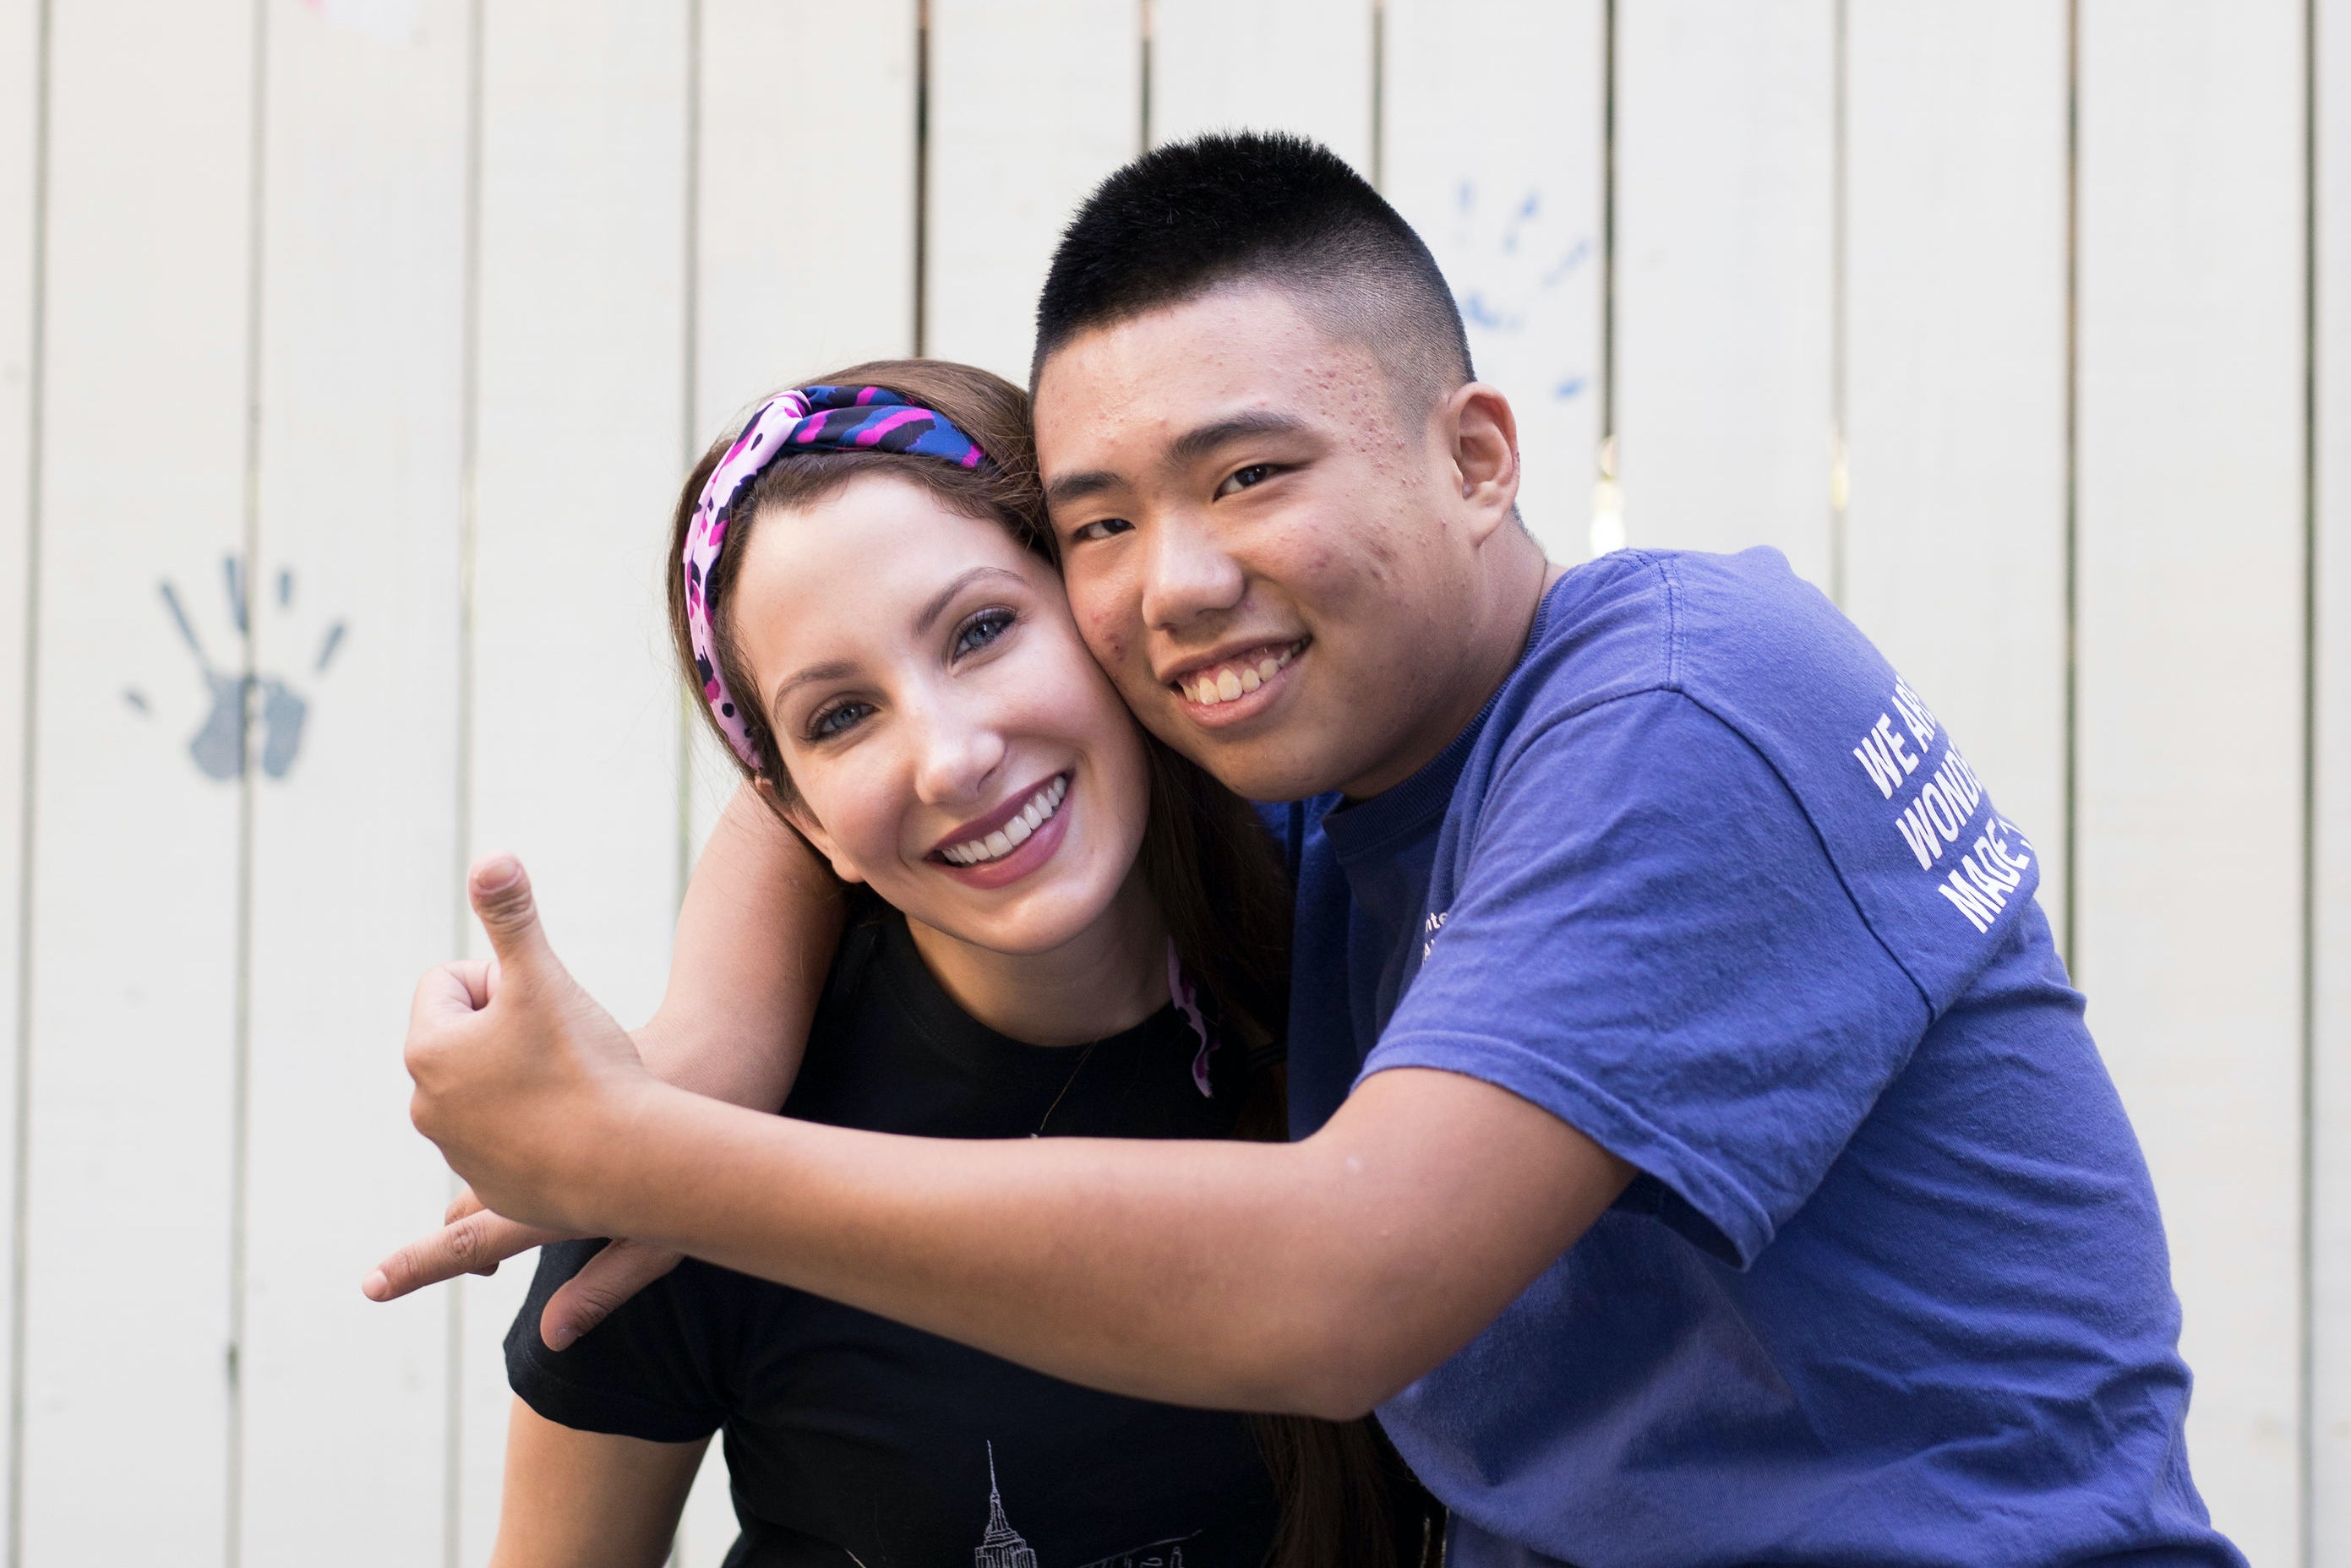 A woman is embraced by a young man who poses with thumbs up